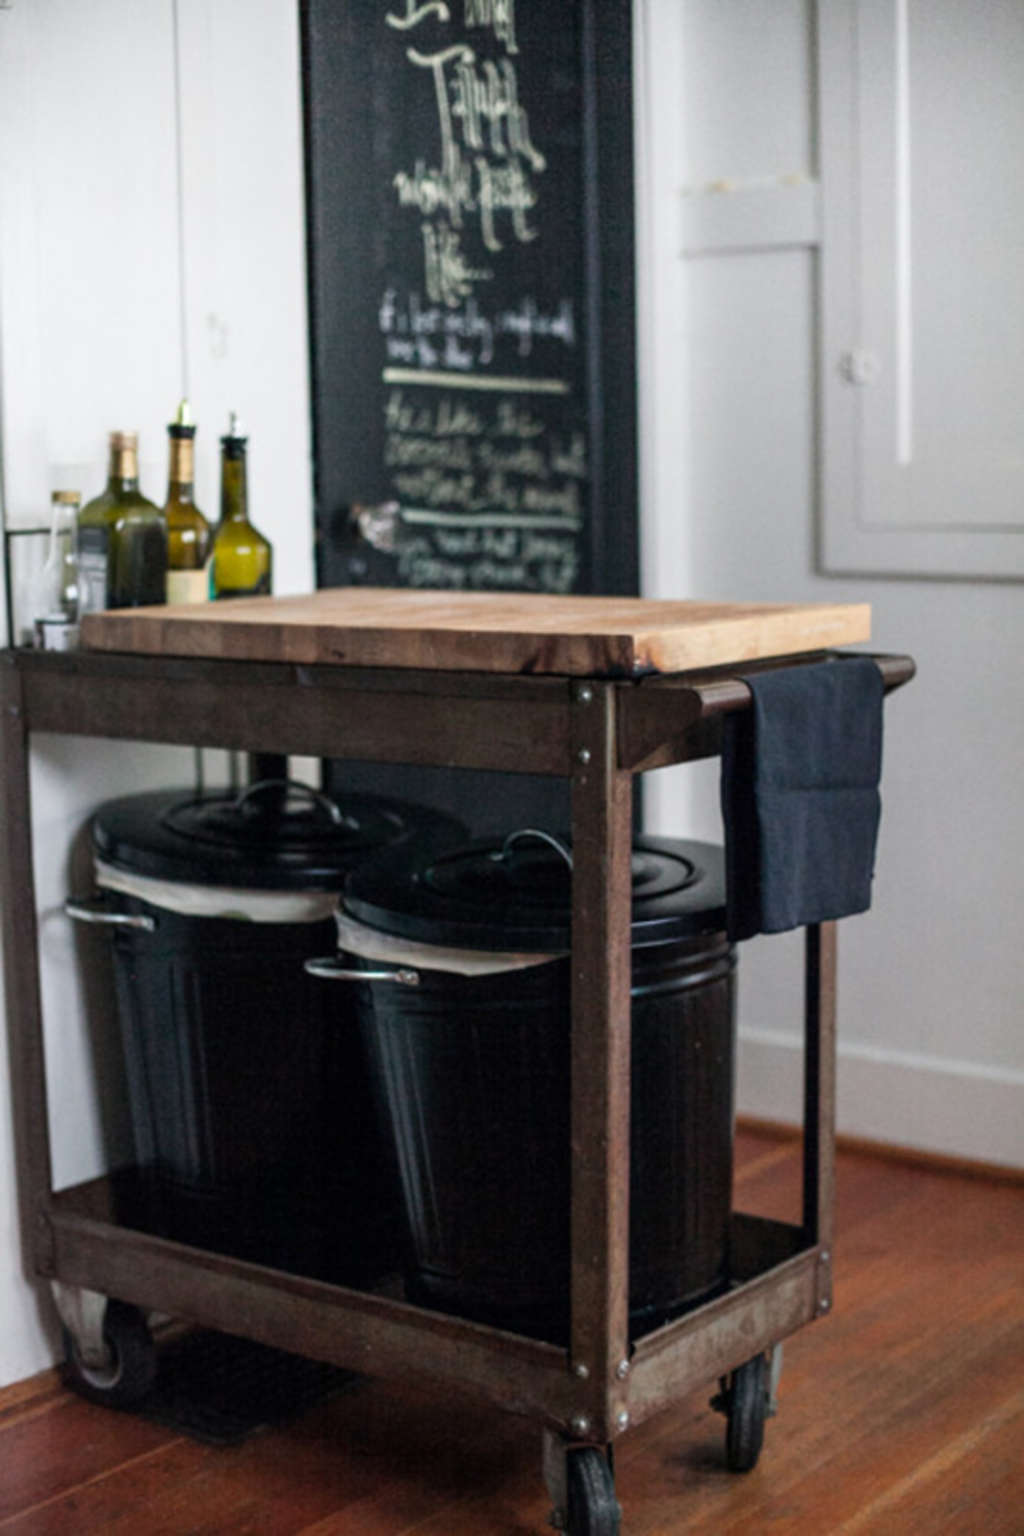 No Place to Put the Trash Can? Use the Bottom of a Kitchen Island Cart